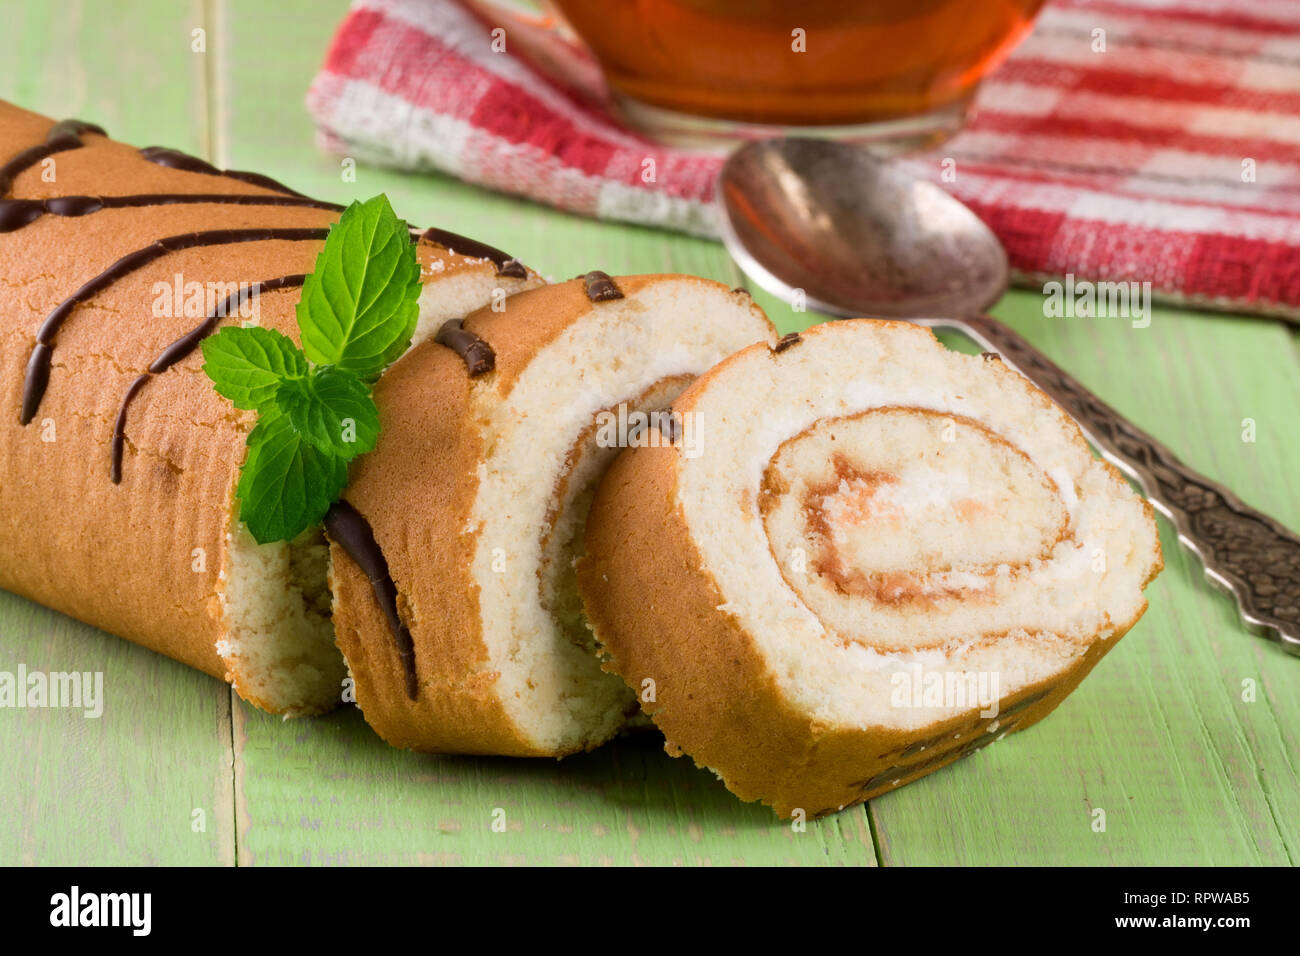 Biscuit swiss roll on green wooden background Stock Photo